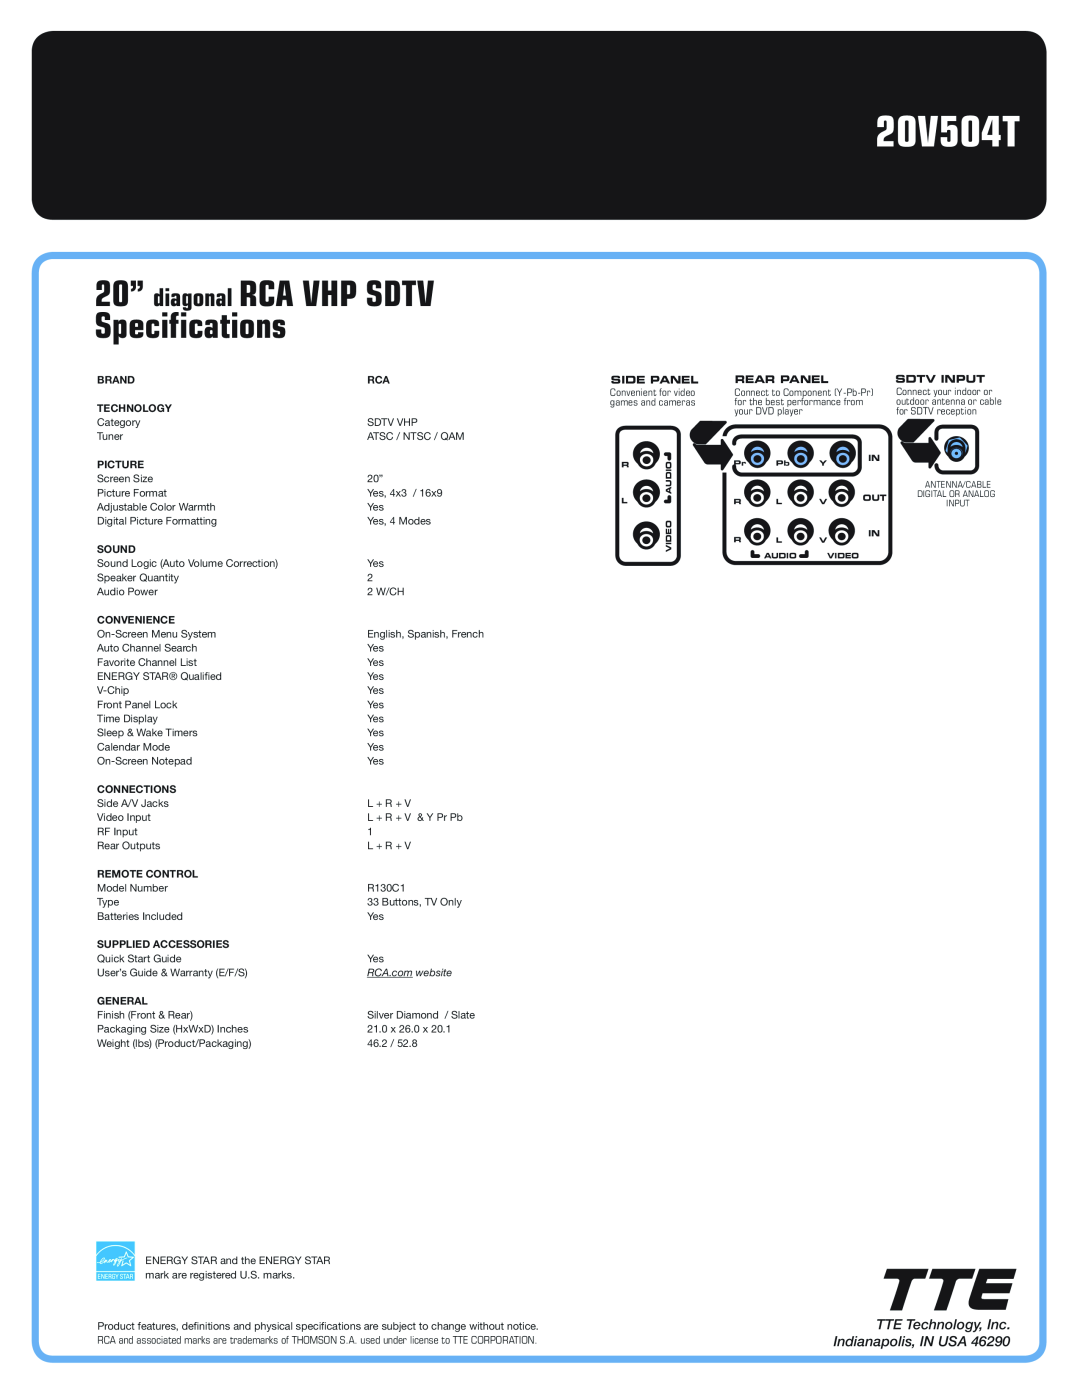 RCA 20V504T manual 20” diagonal RCA VHP SDTV Specifications, TTE Technology, Inc Indianapolis, IN USA, RCA.com website 